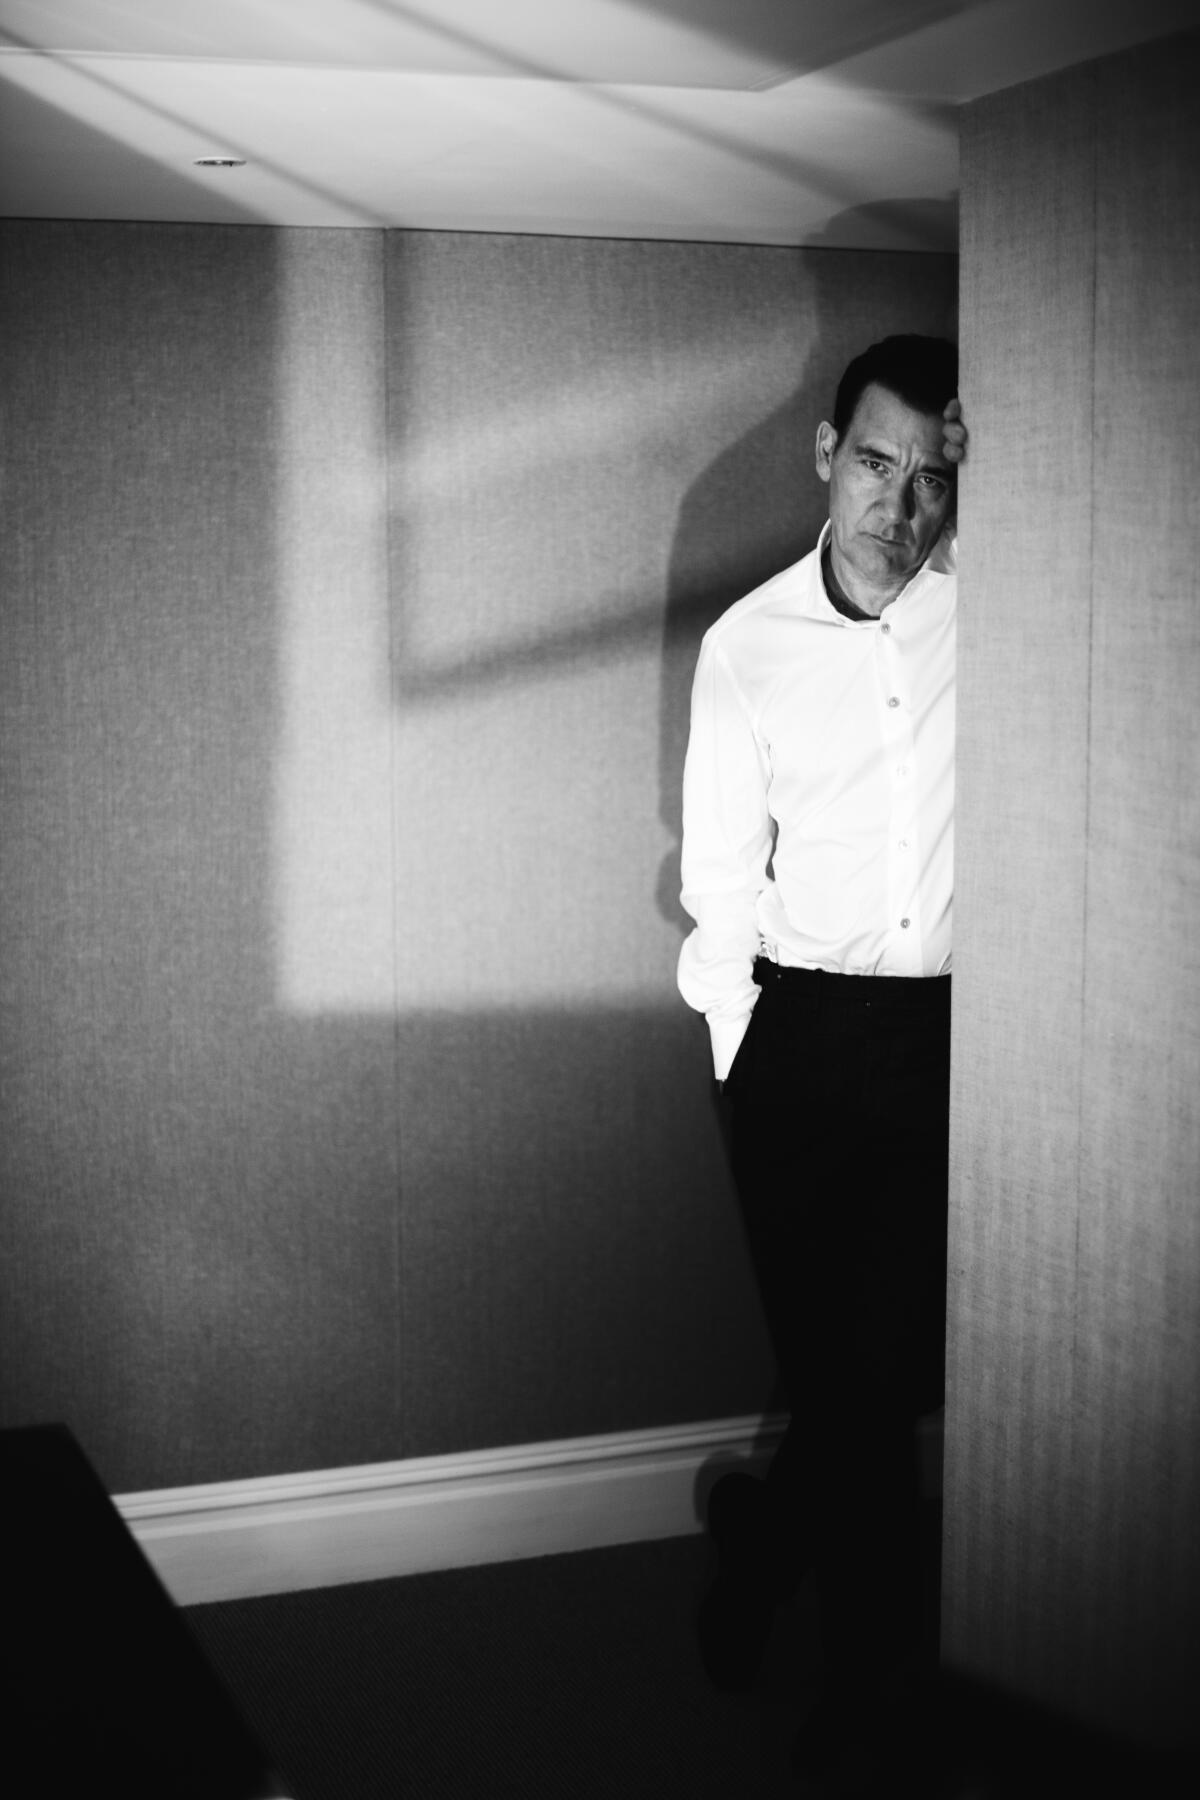 Clive Owen in a white shirt and dark pants leans his head against a doorway.